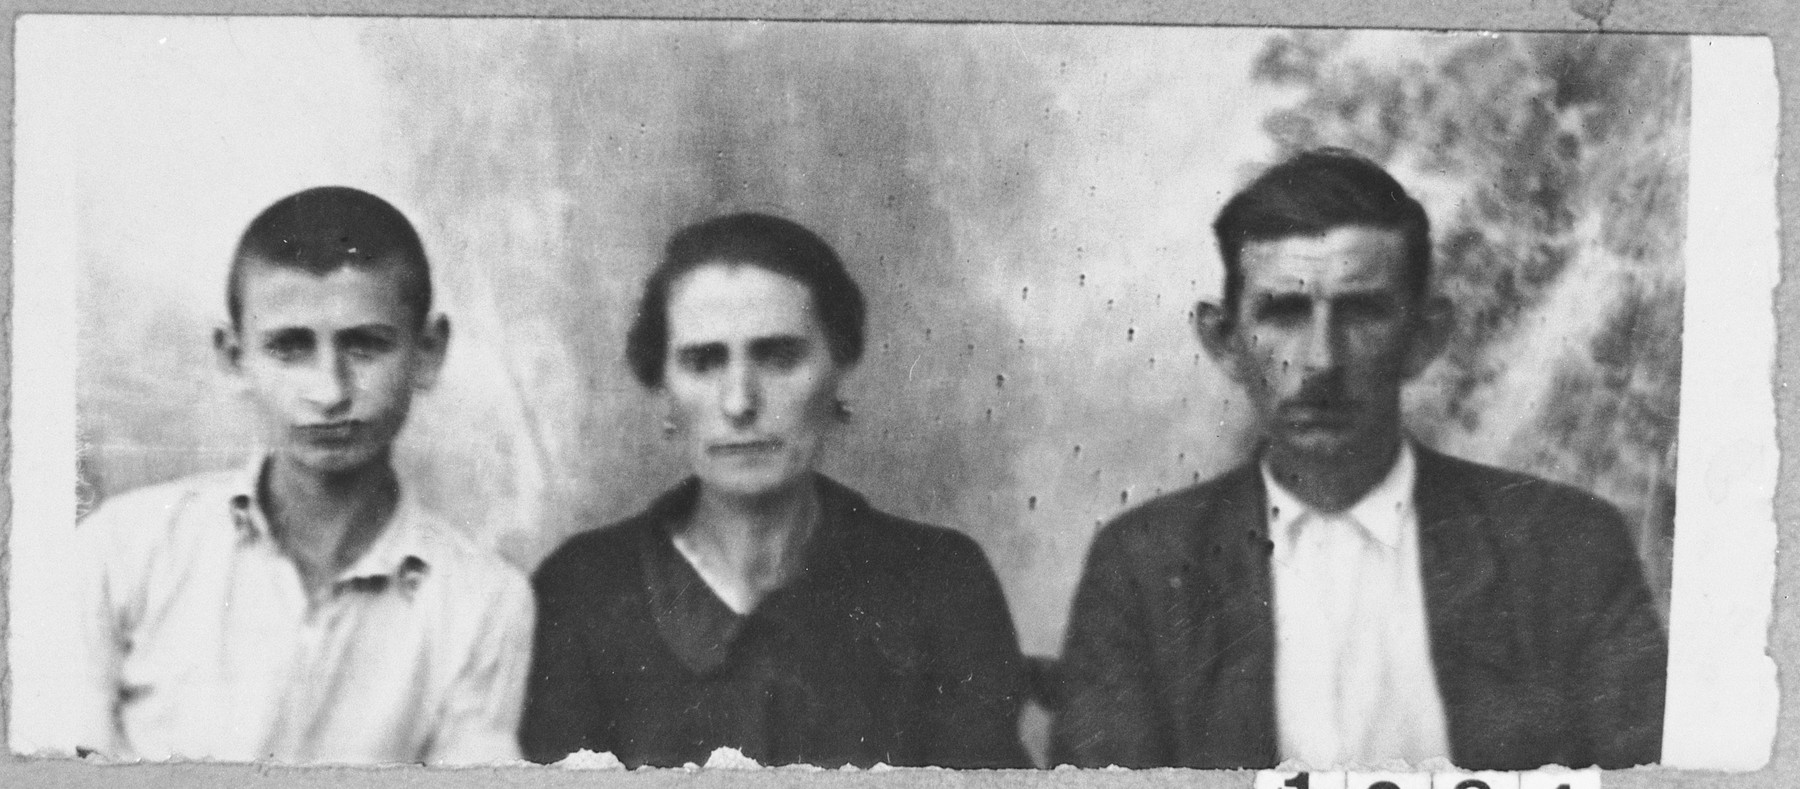 Portrait of Rachamin Hasson, his wife, Lea, and his son, David.  Rachamin was a rag dealer and David, a student.  They lived at Davidova 13 in Bitola.